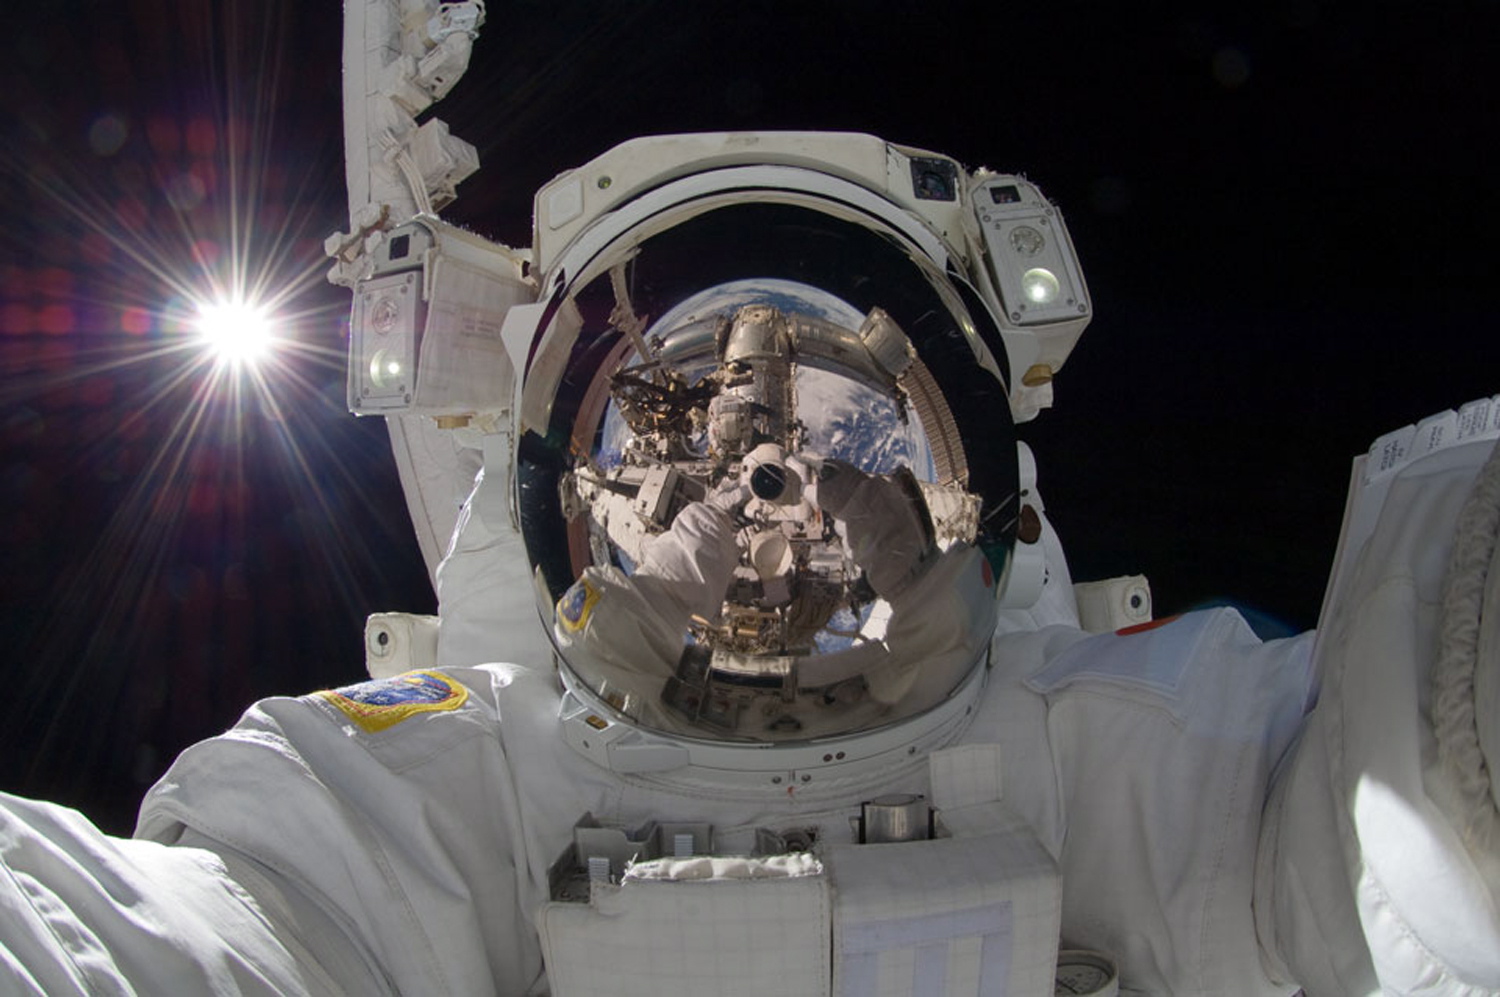 NASA
International space station astronaut Aki Hoshide takes a self-portrait Sept. 18,while in space. The practice of freezing and sharing our tiniest slices of life in &quot;selfies&quot; has become so popular that the granddaddy of dictionaries, the Oxford, is monitoring the term as a possible addition.